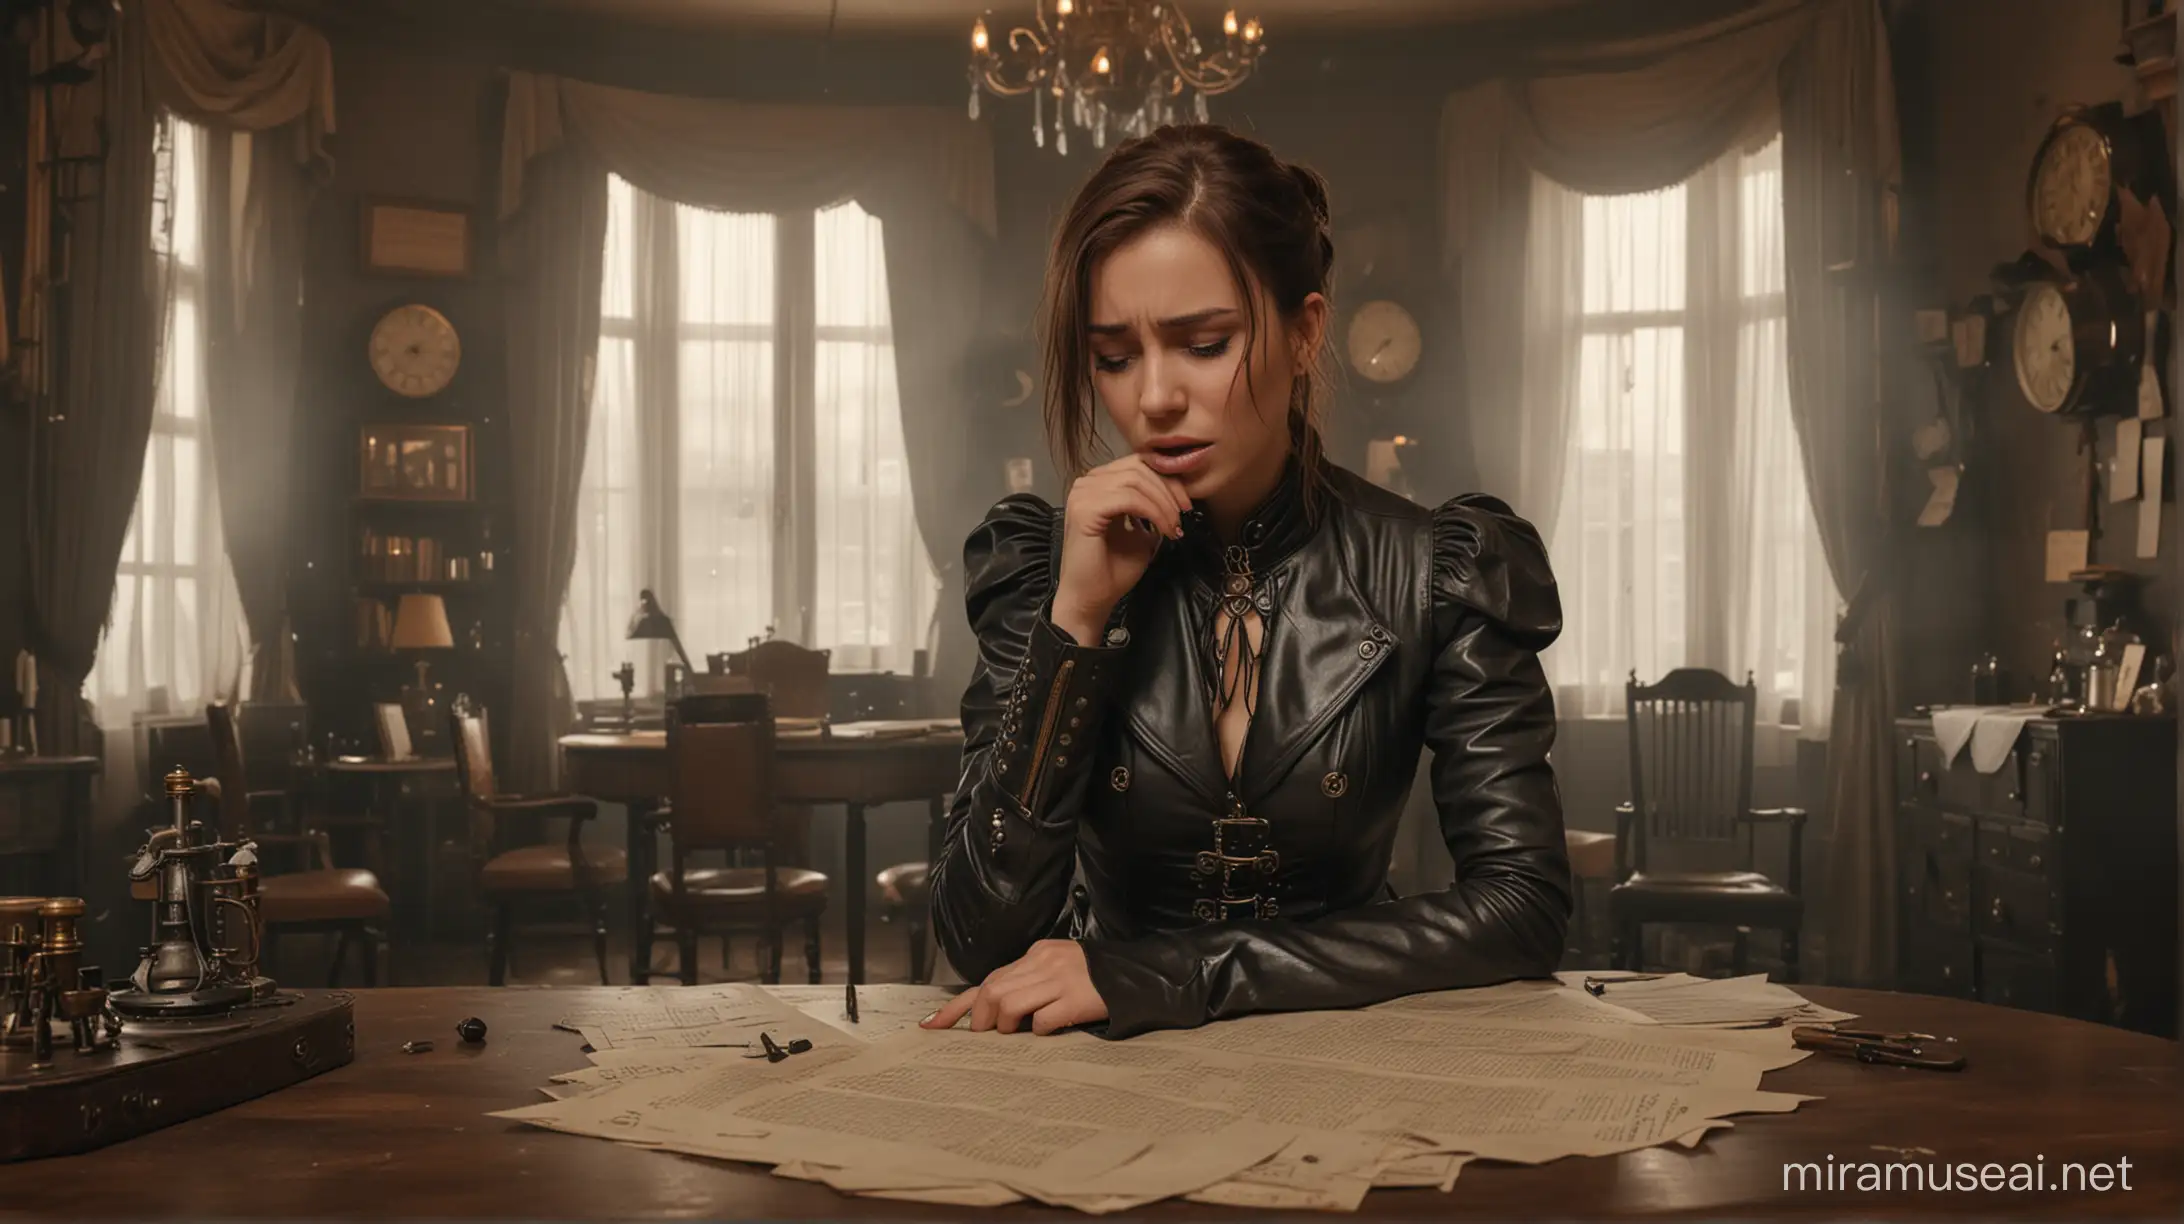 Young steampunk woman in a leather dress sits at a round table in her room, cries and tears up some letter.